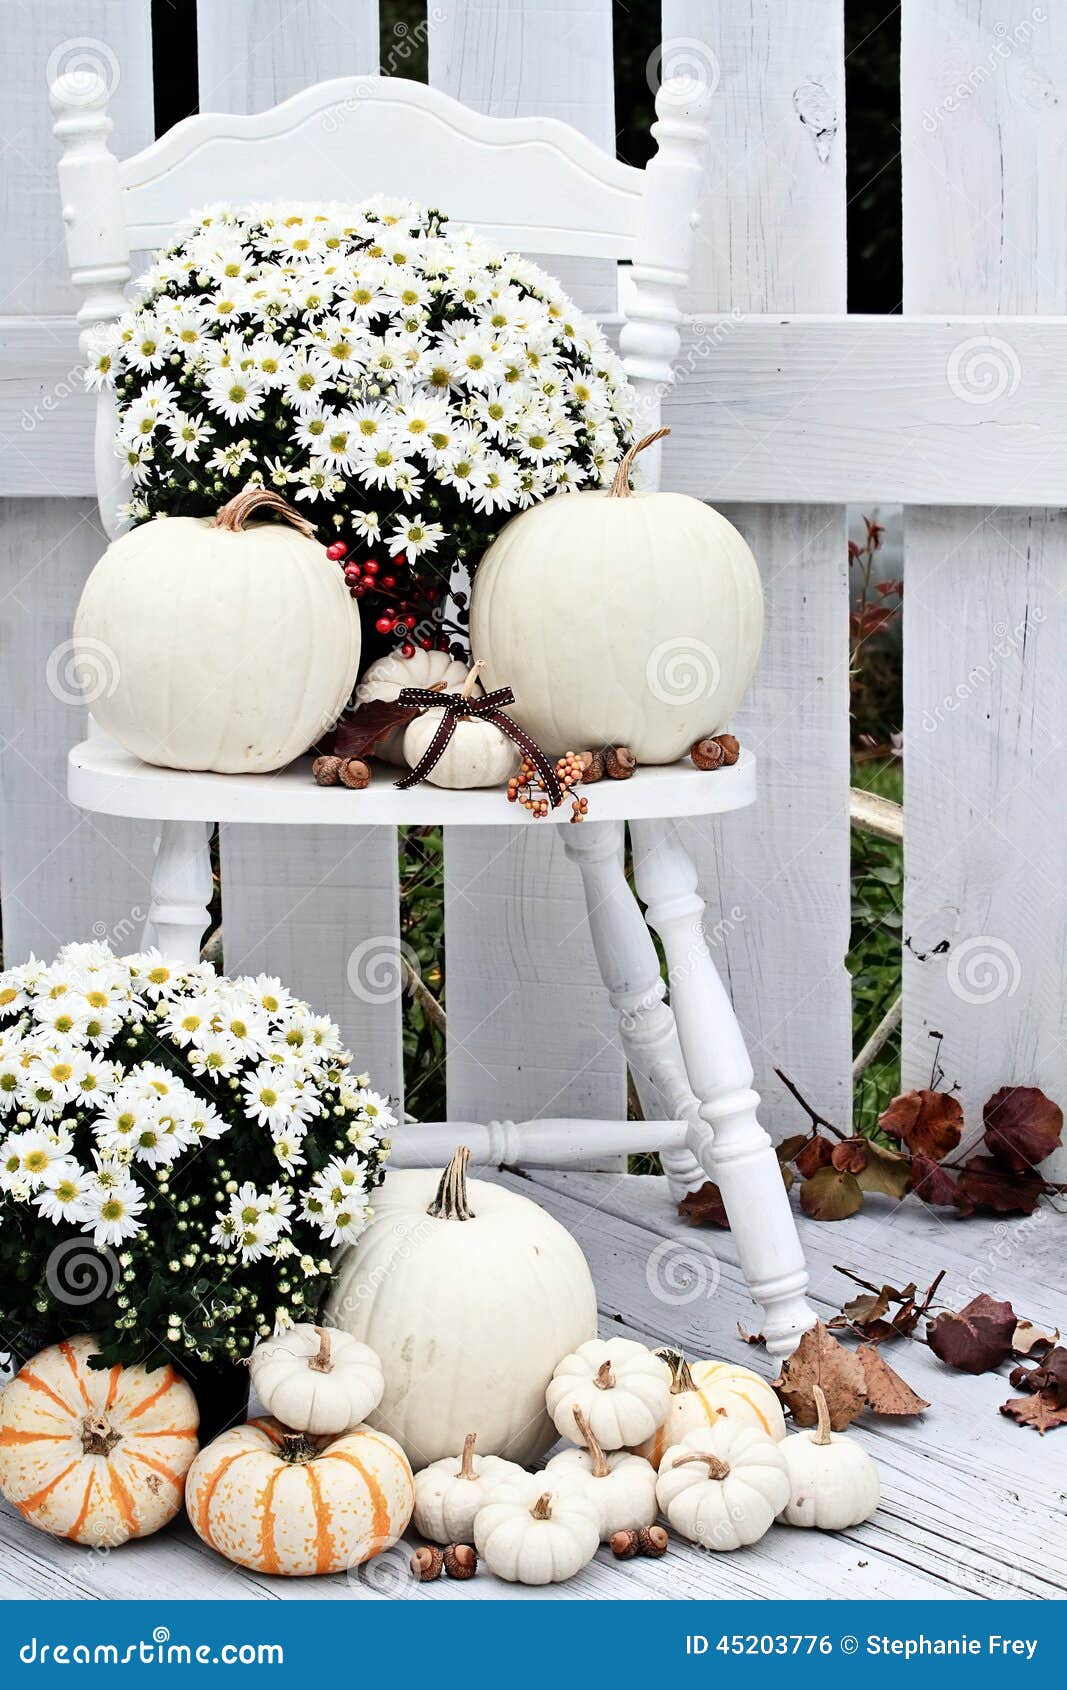 white pumpkins and mums